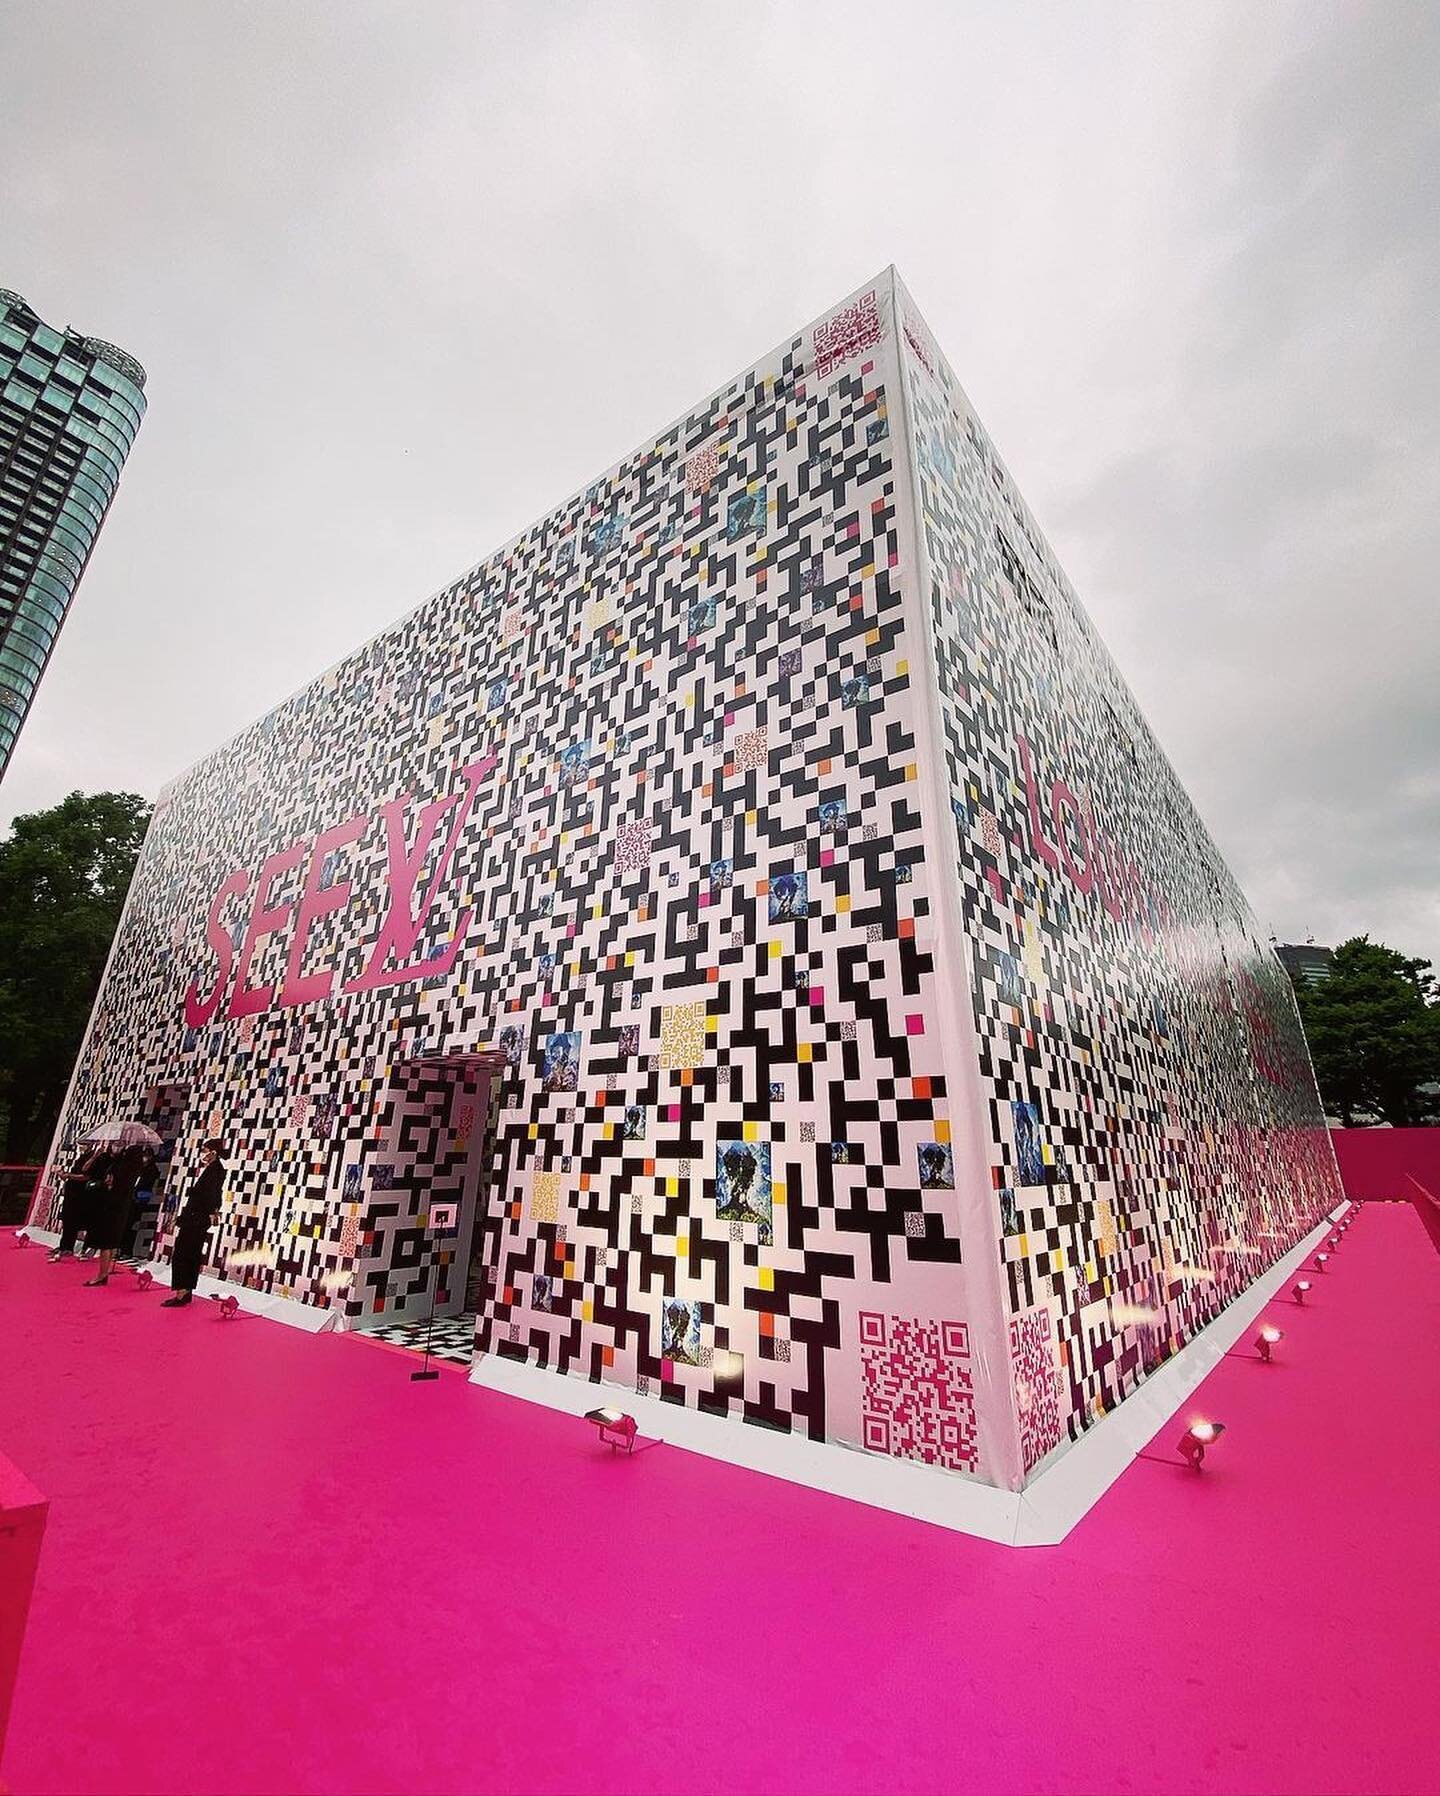 Louis Vuitton &quot;SEE LV&quot; is a world-traveling exhibition that invites you on a journey through the history of the Maison over 160 years and the brand's love affair with Japan for two centuries.
From 2020, Louis Vuitton &quot;SEE LV&quot; exhi